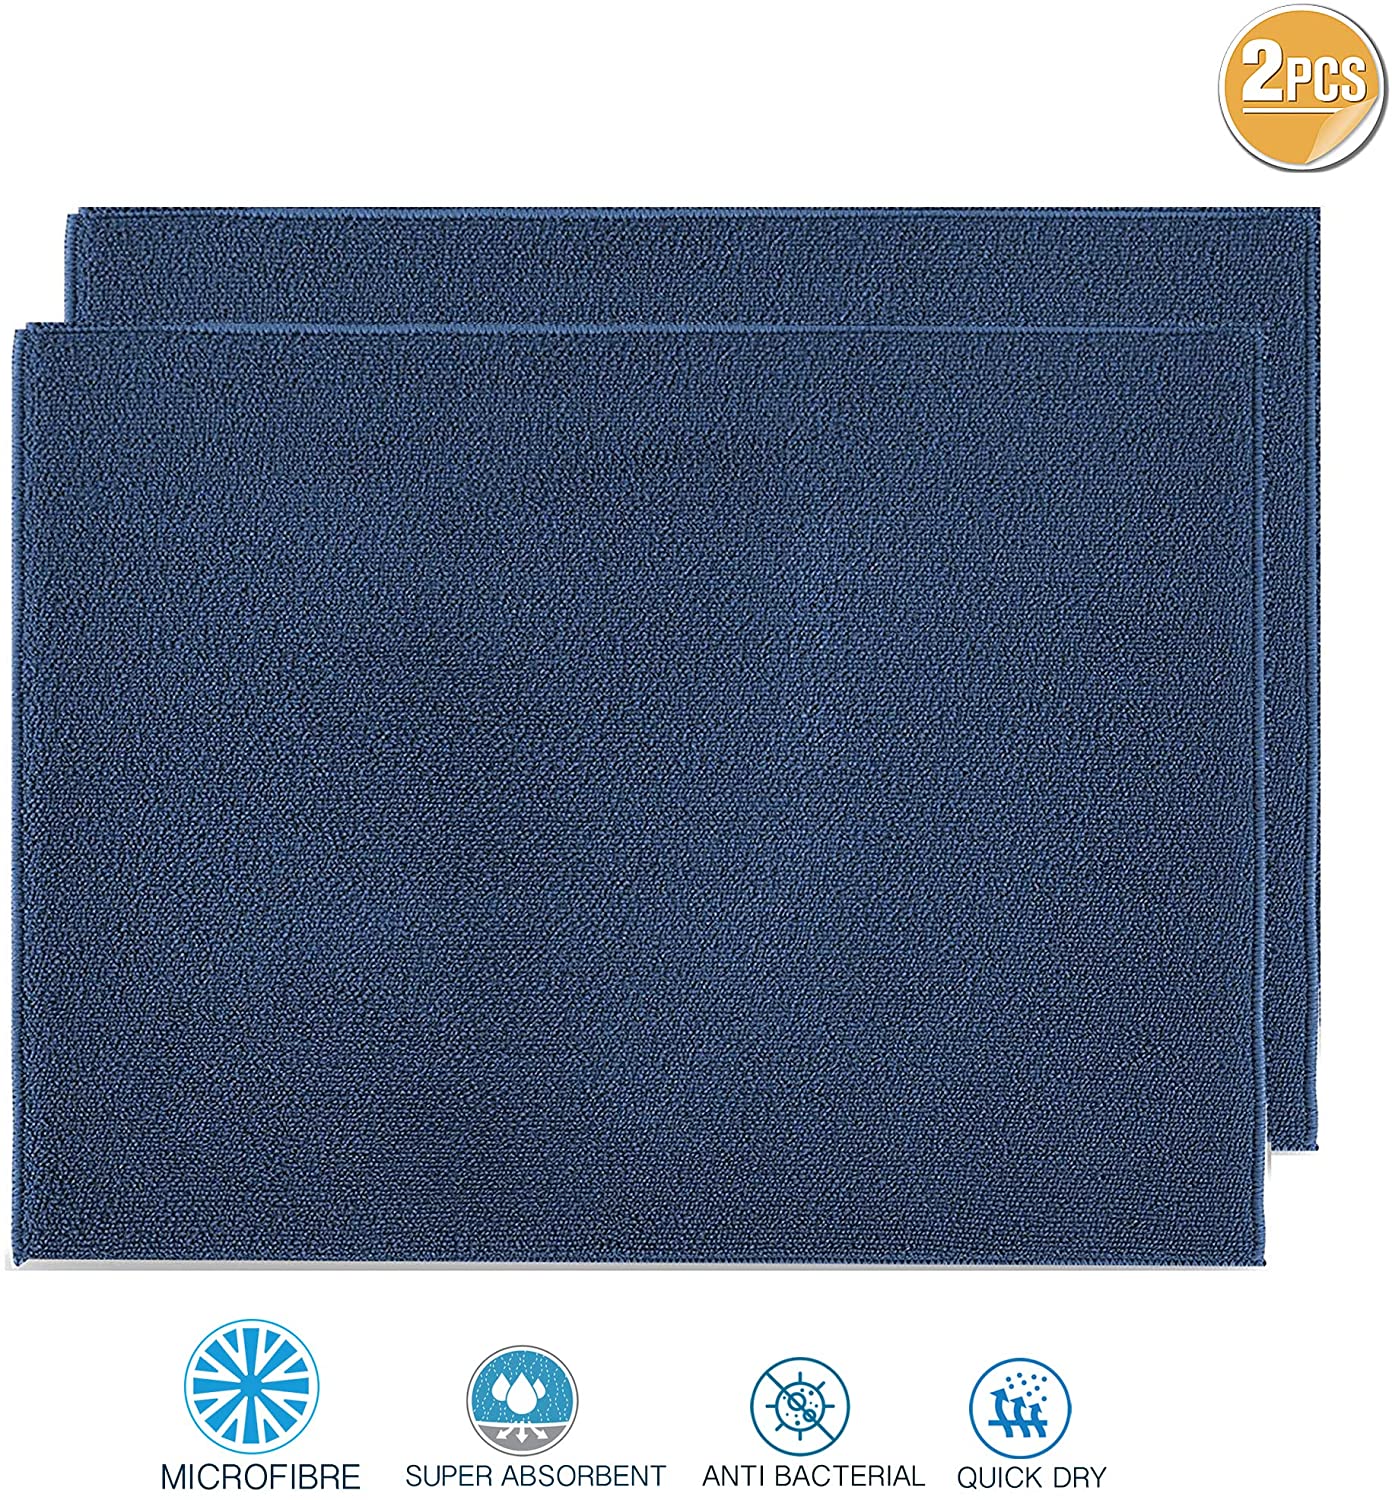 Drying-Mats-Microfibre-Absorbent-Reversible-for-Kitchen